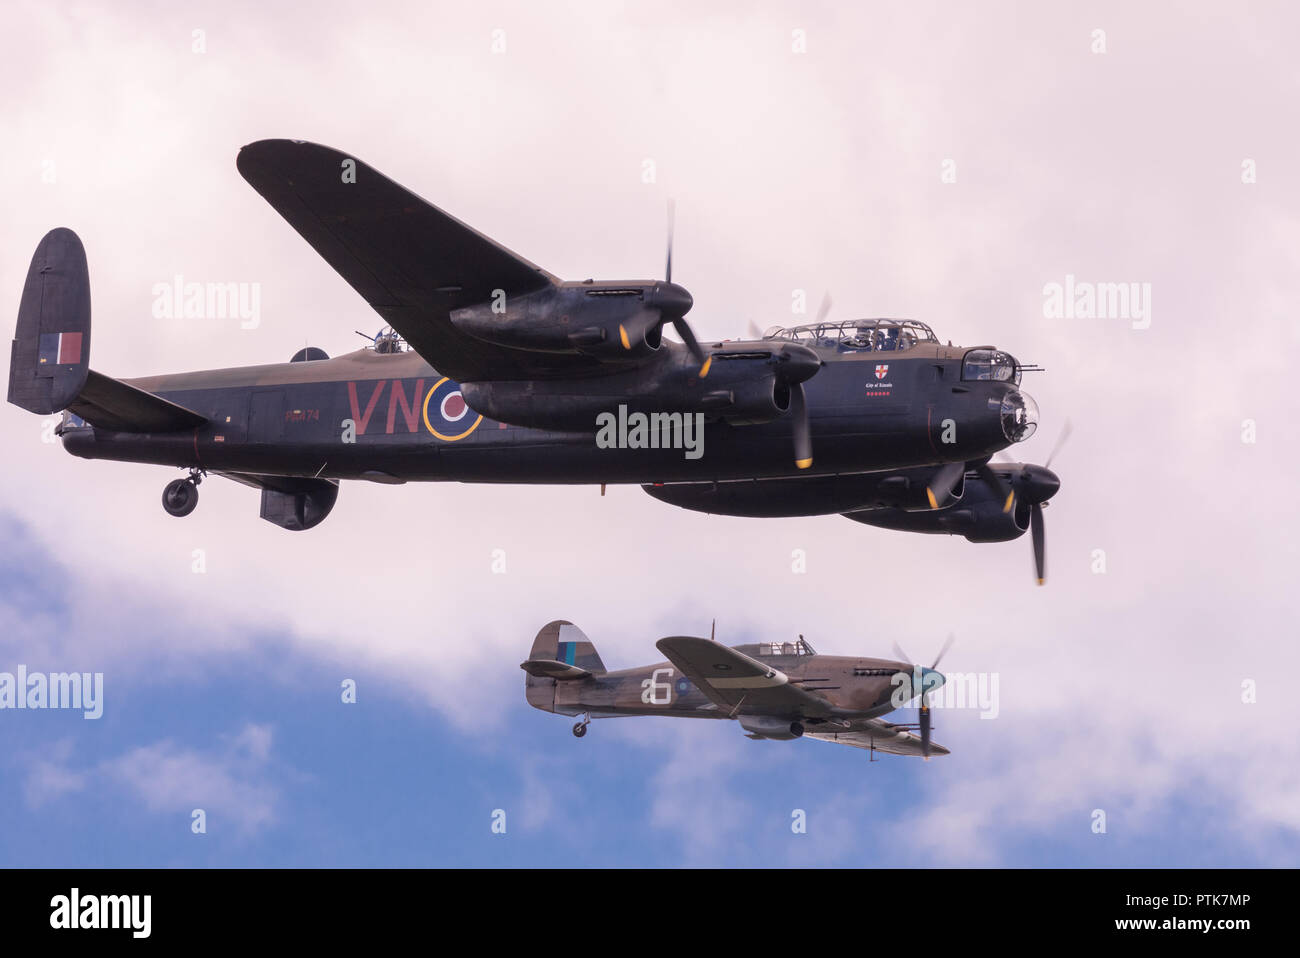 WWII Royal Air Force Avro Lancaster bomber escorted by Hawker Hurricane fighter at the IWM Duxford Air Show. Stock Photo